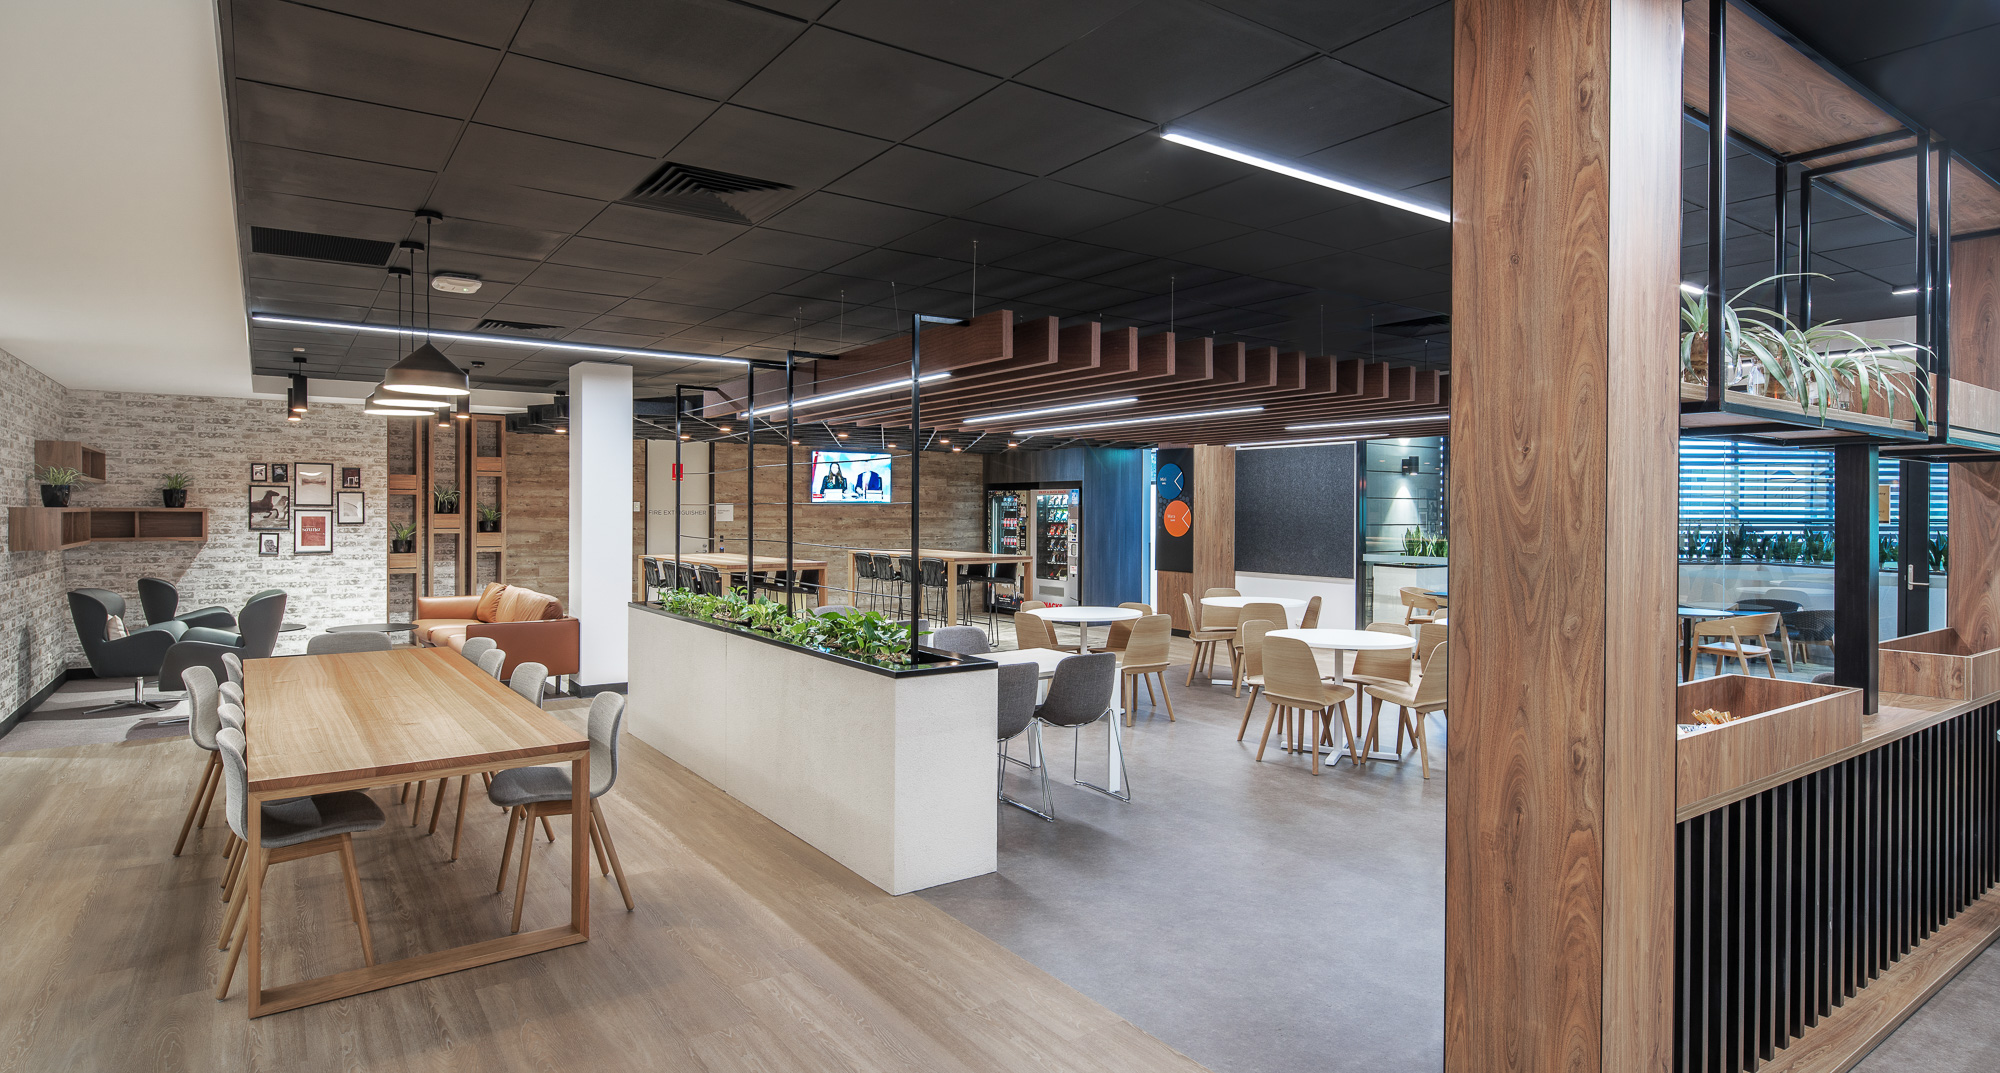 Corporate canteen designed by Hodgkison Architects Adelaide